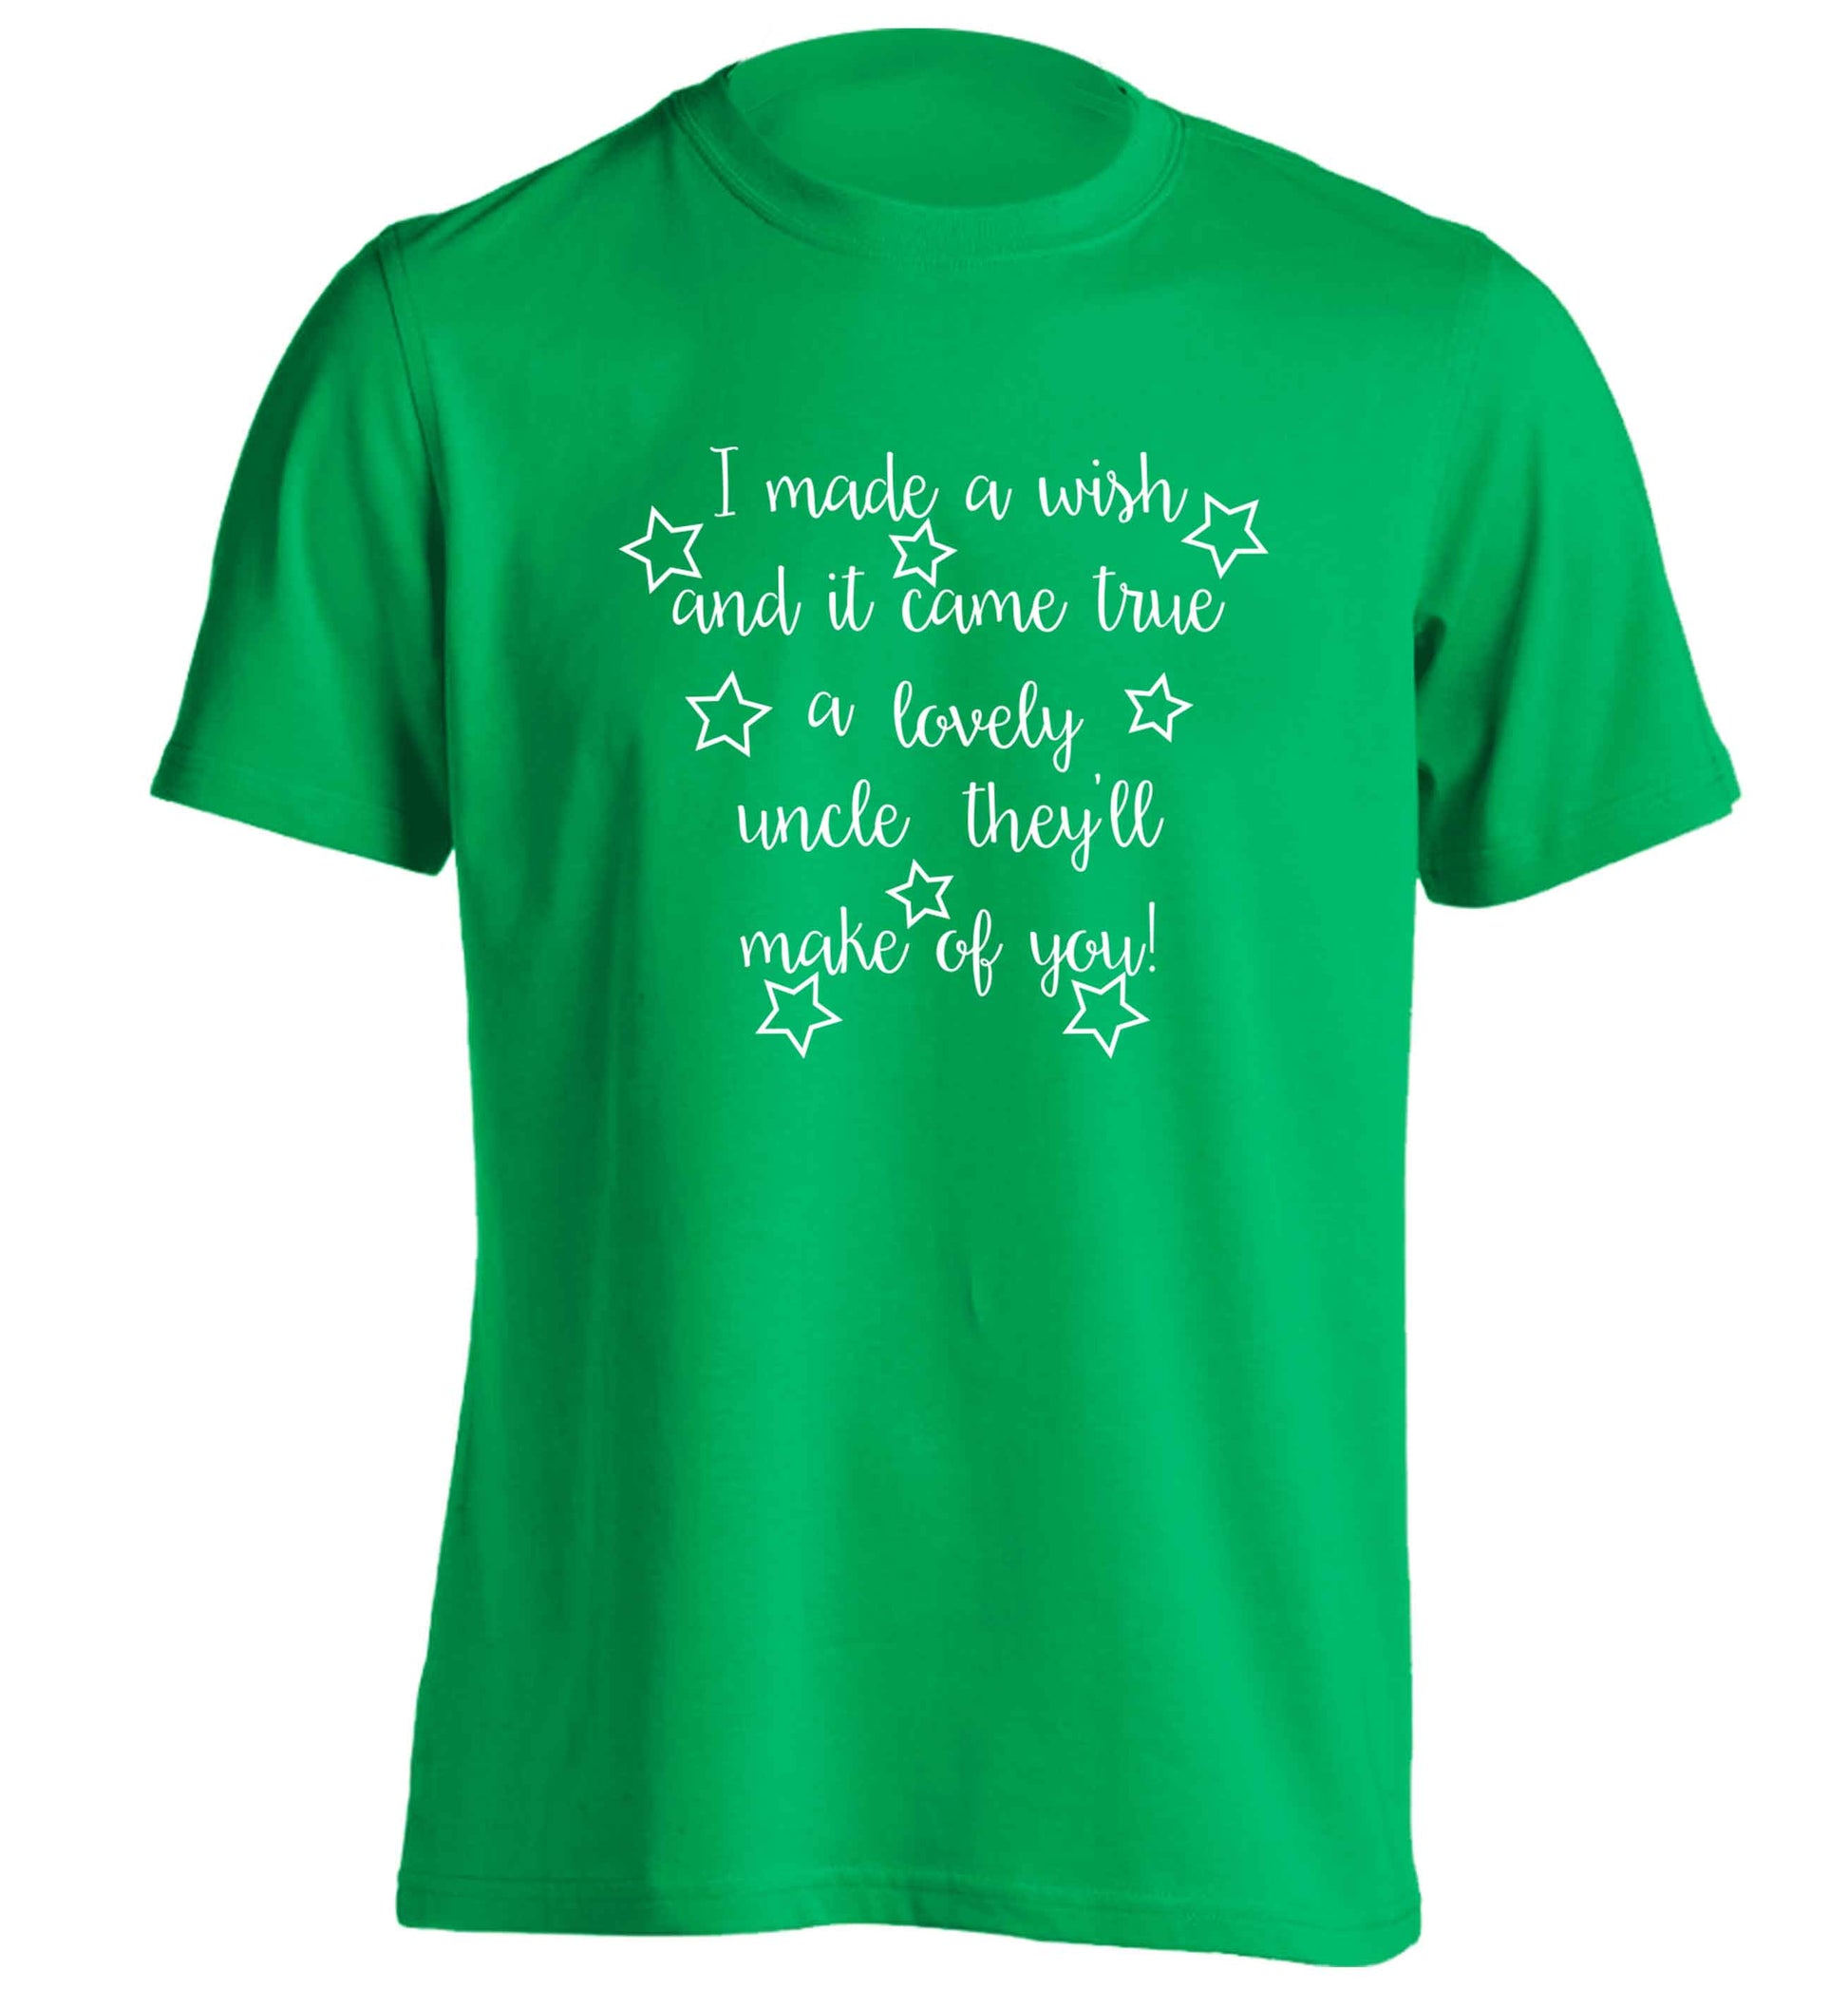 I made a wish and it came true a lovely uncle they'll make of you! adults unisex green Tshirt 2XL